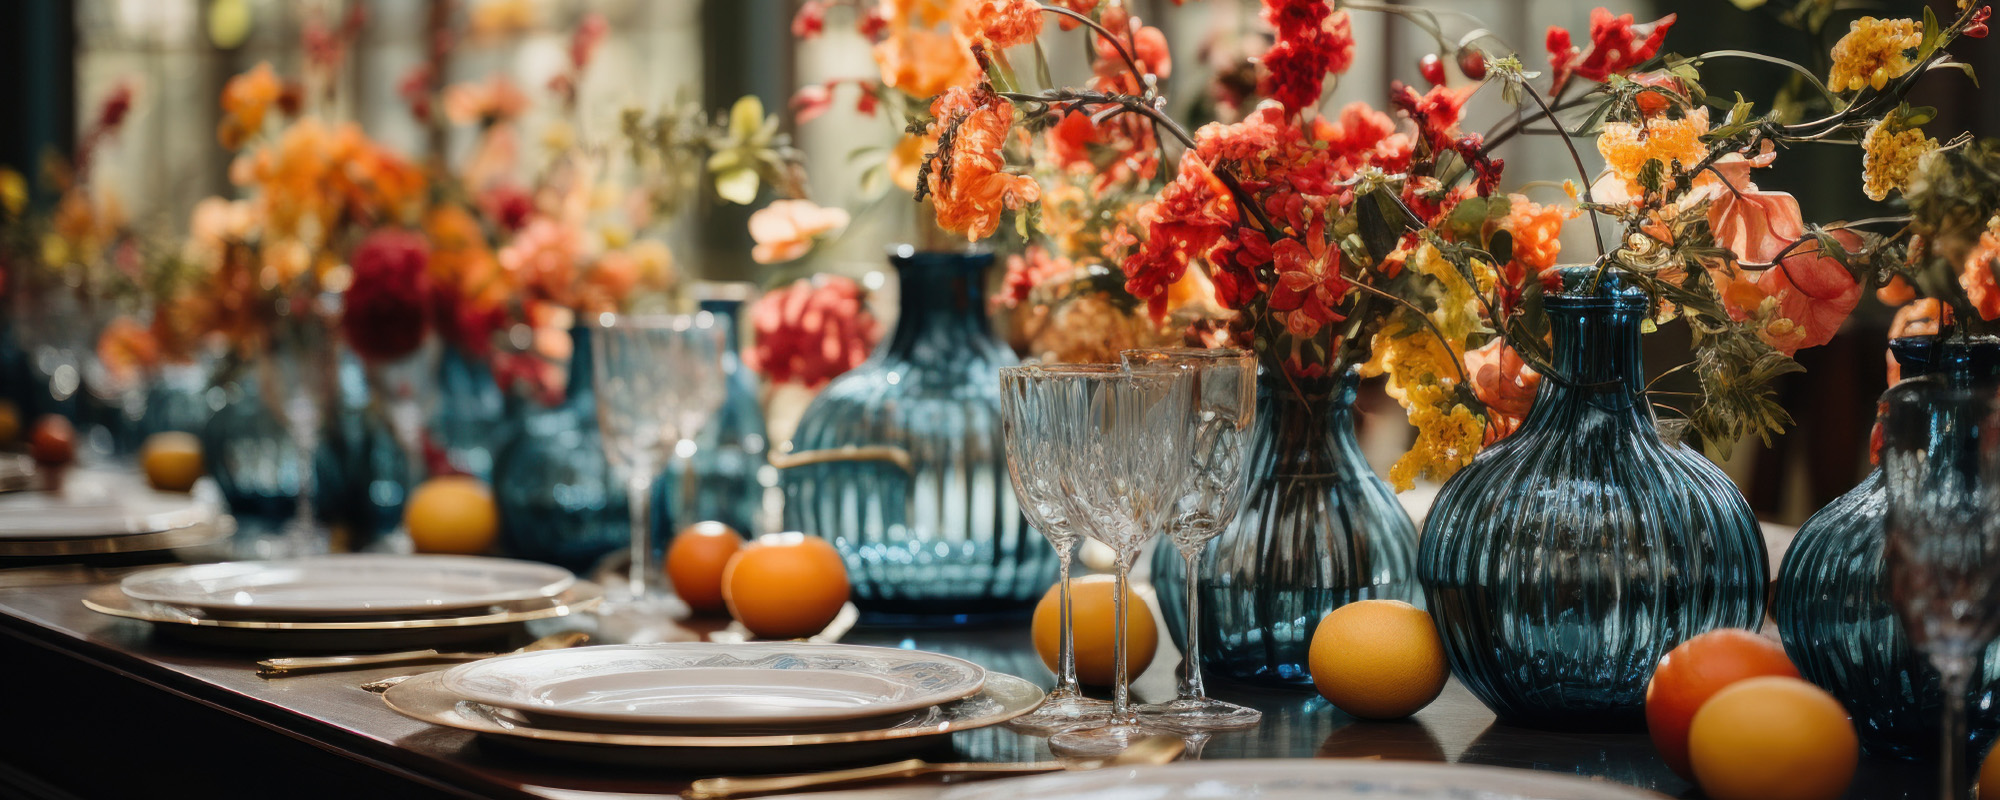 Harvest style table set-up and decor